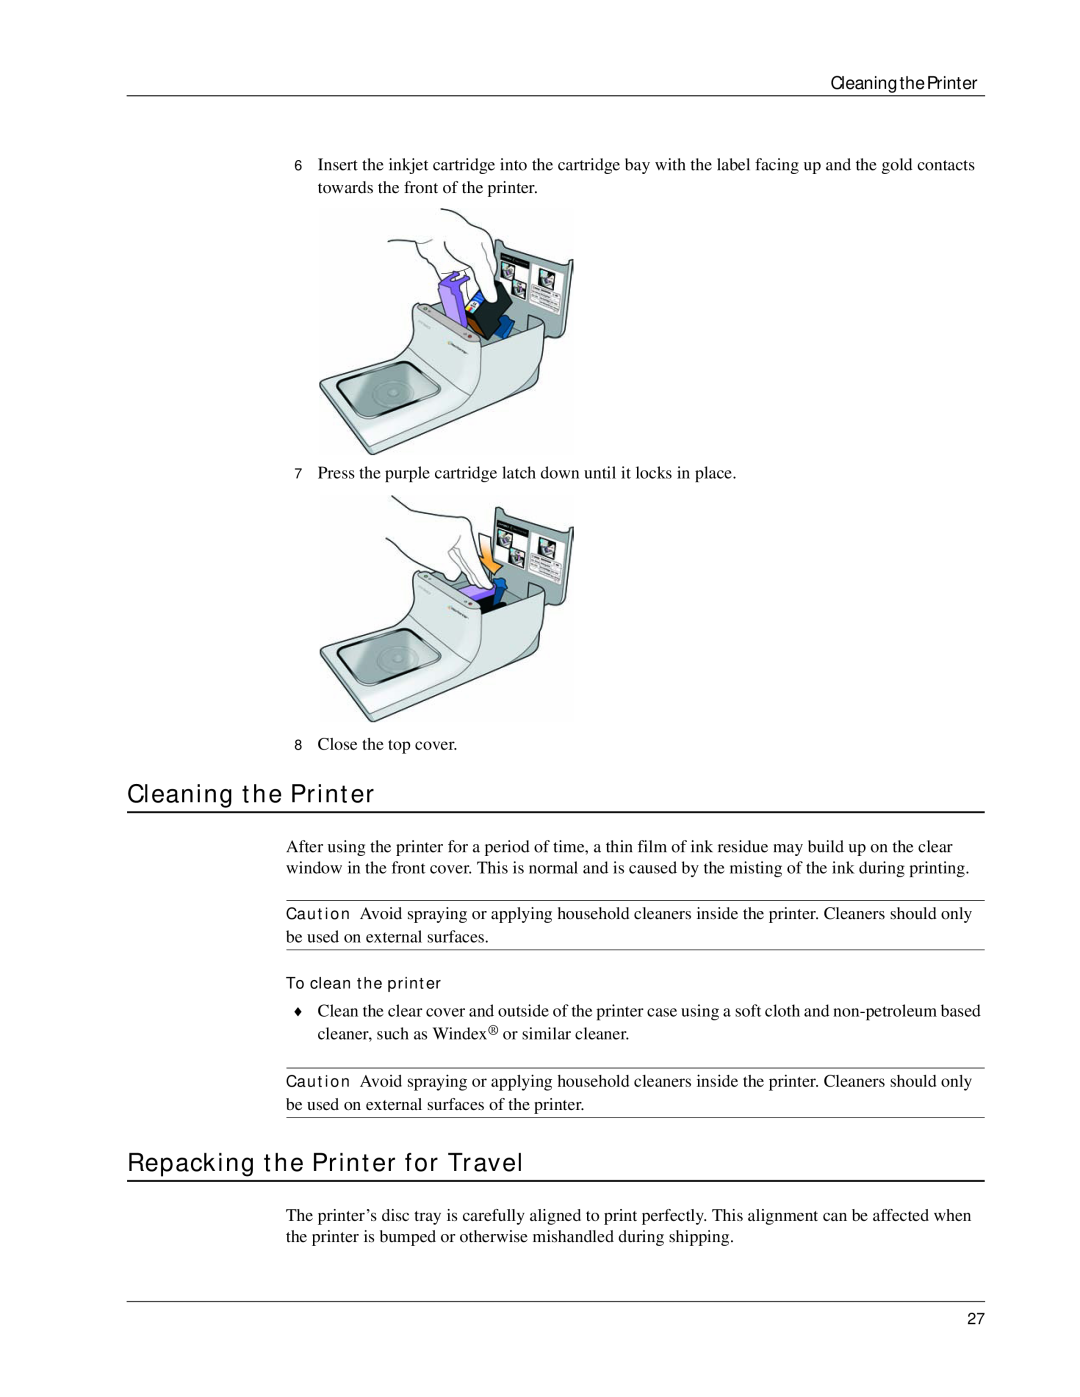 Dymo DiscPainter manual Cleaning the Printer, Repacking the Printer for Travel 